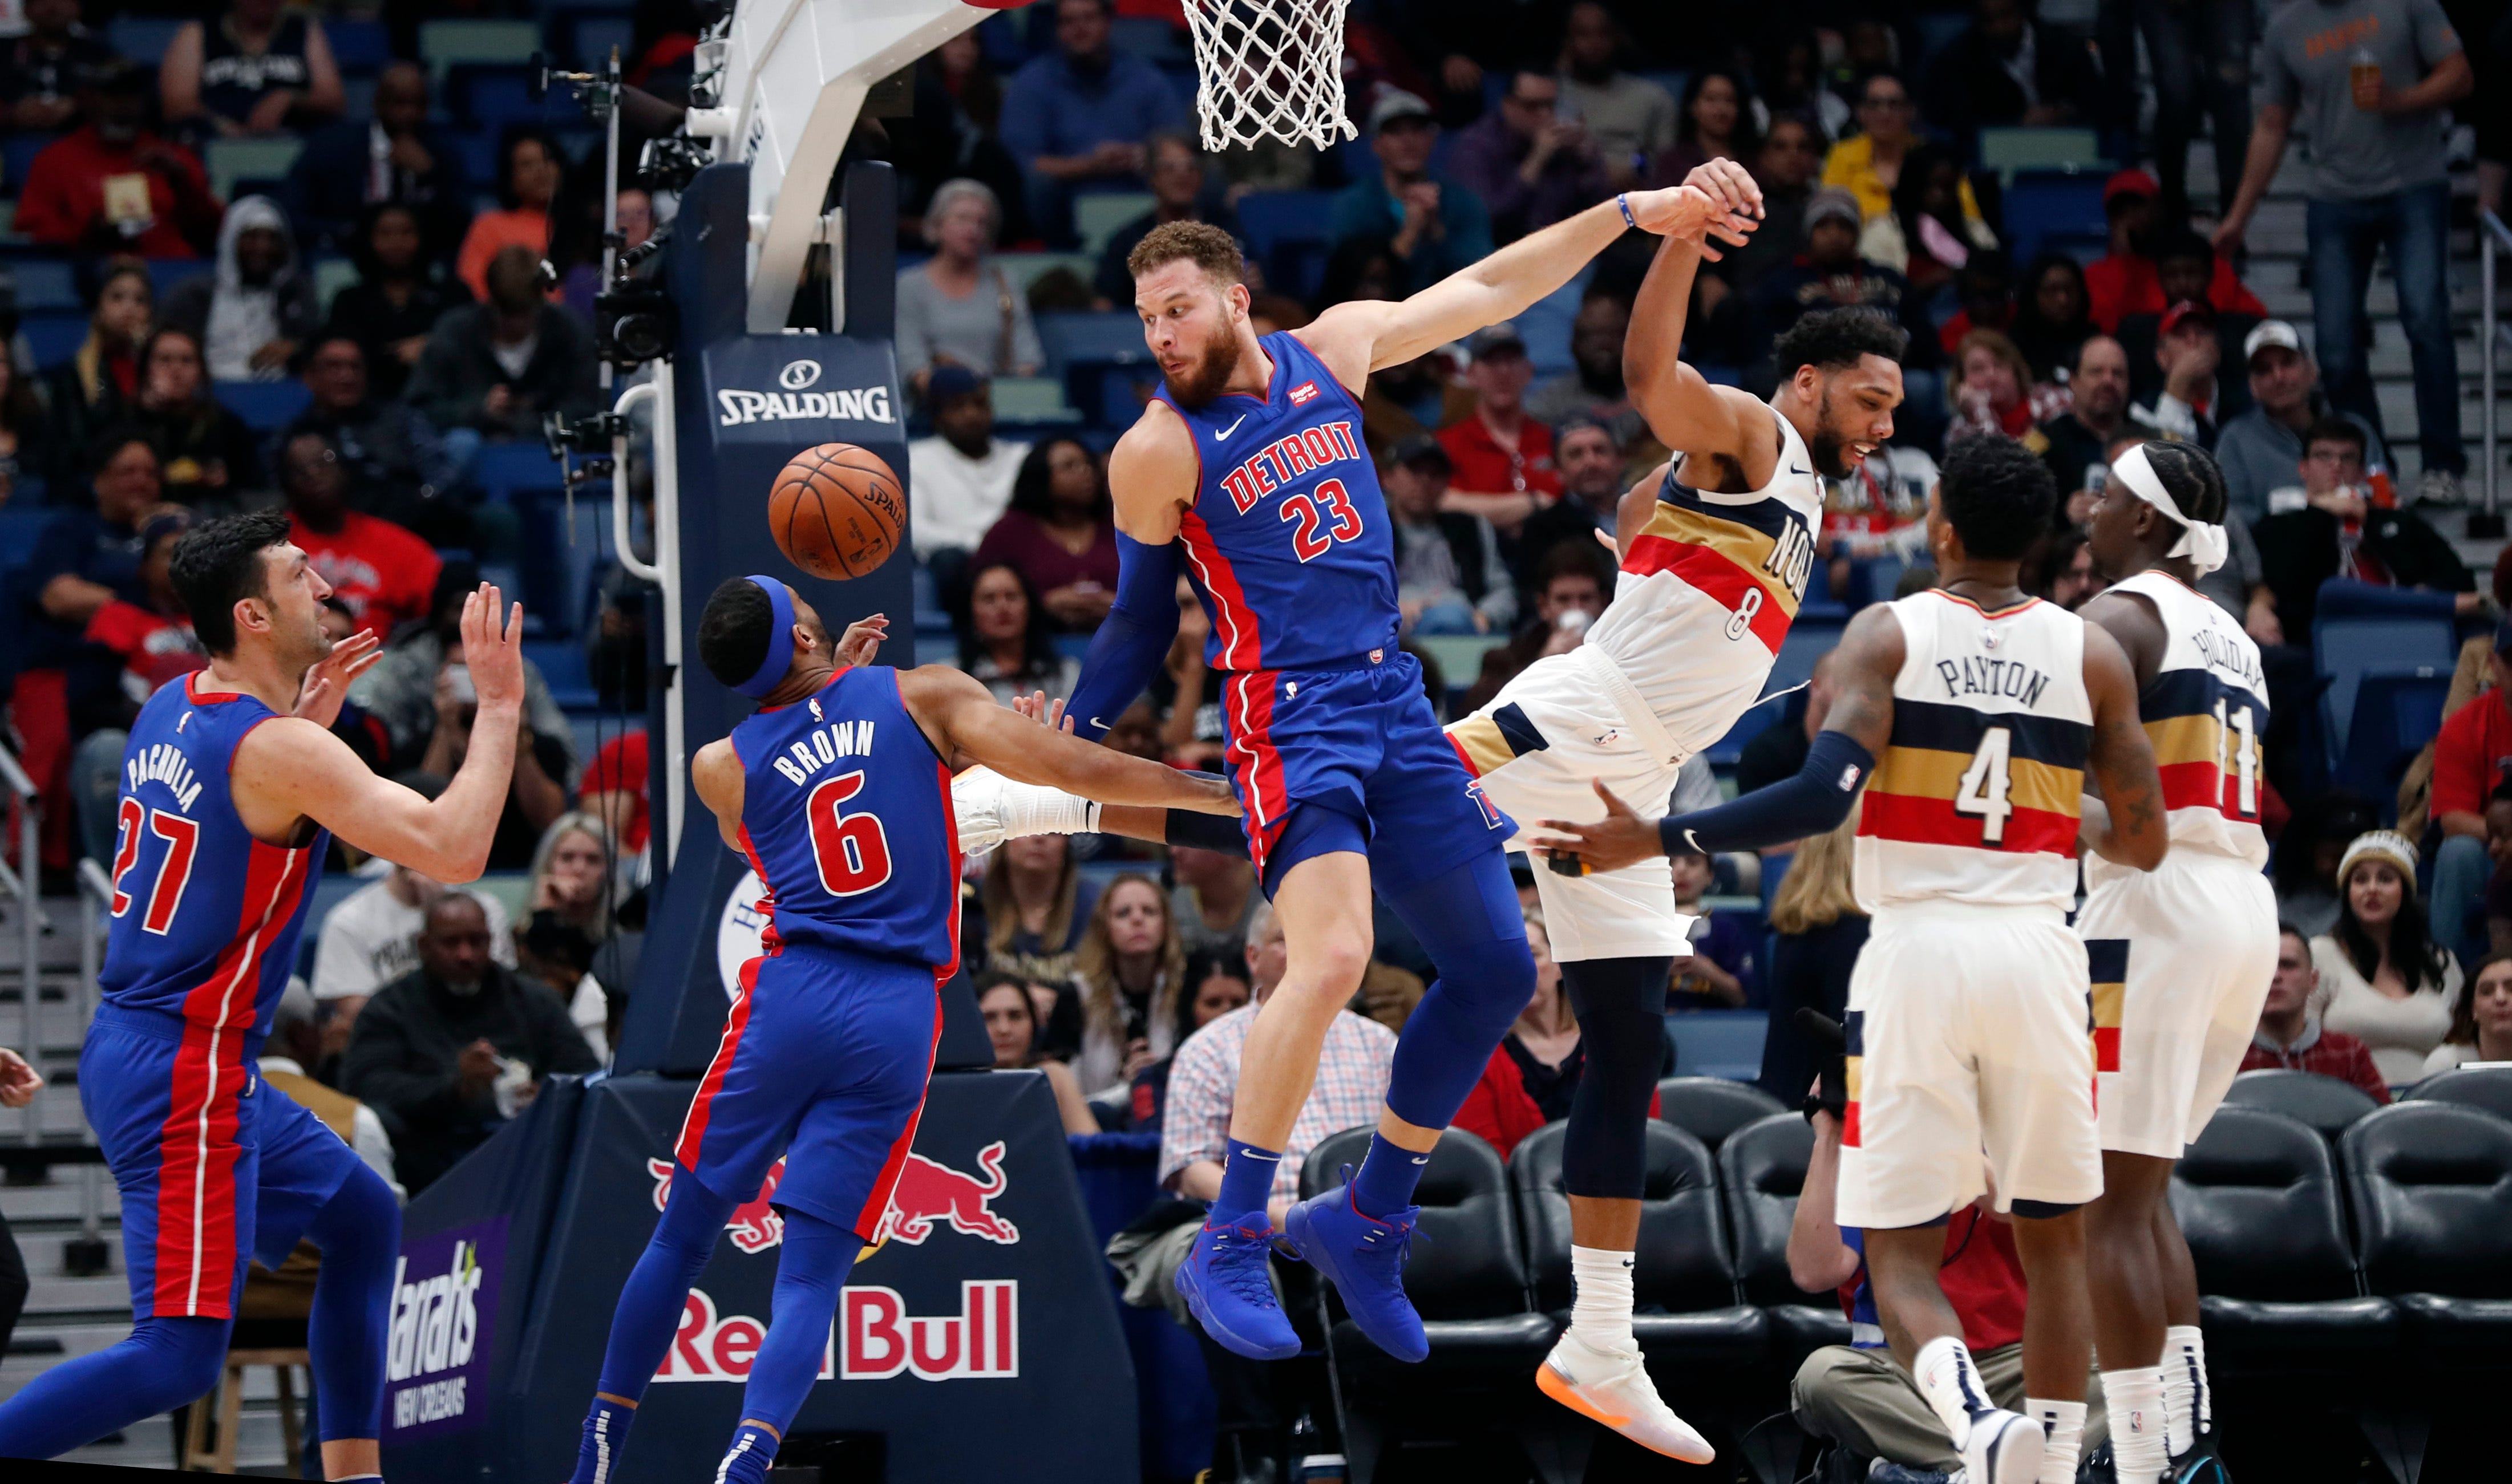 Detroit Pistons forward Blake Griffin (23) passes the ball to center Zaza Pachulia (27) as New Orleans Pelicans center Jahlil Okafor (8) defends during the 98-94 victory in New Orleans, Wednesday, Jan. 23, 2019.